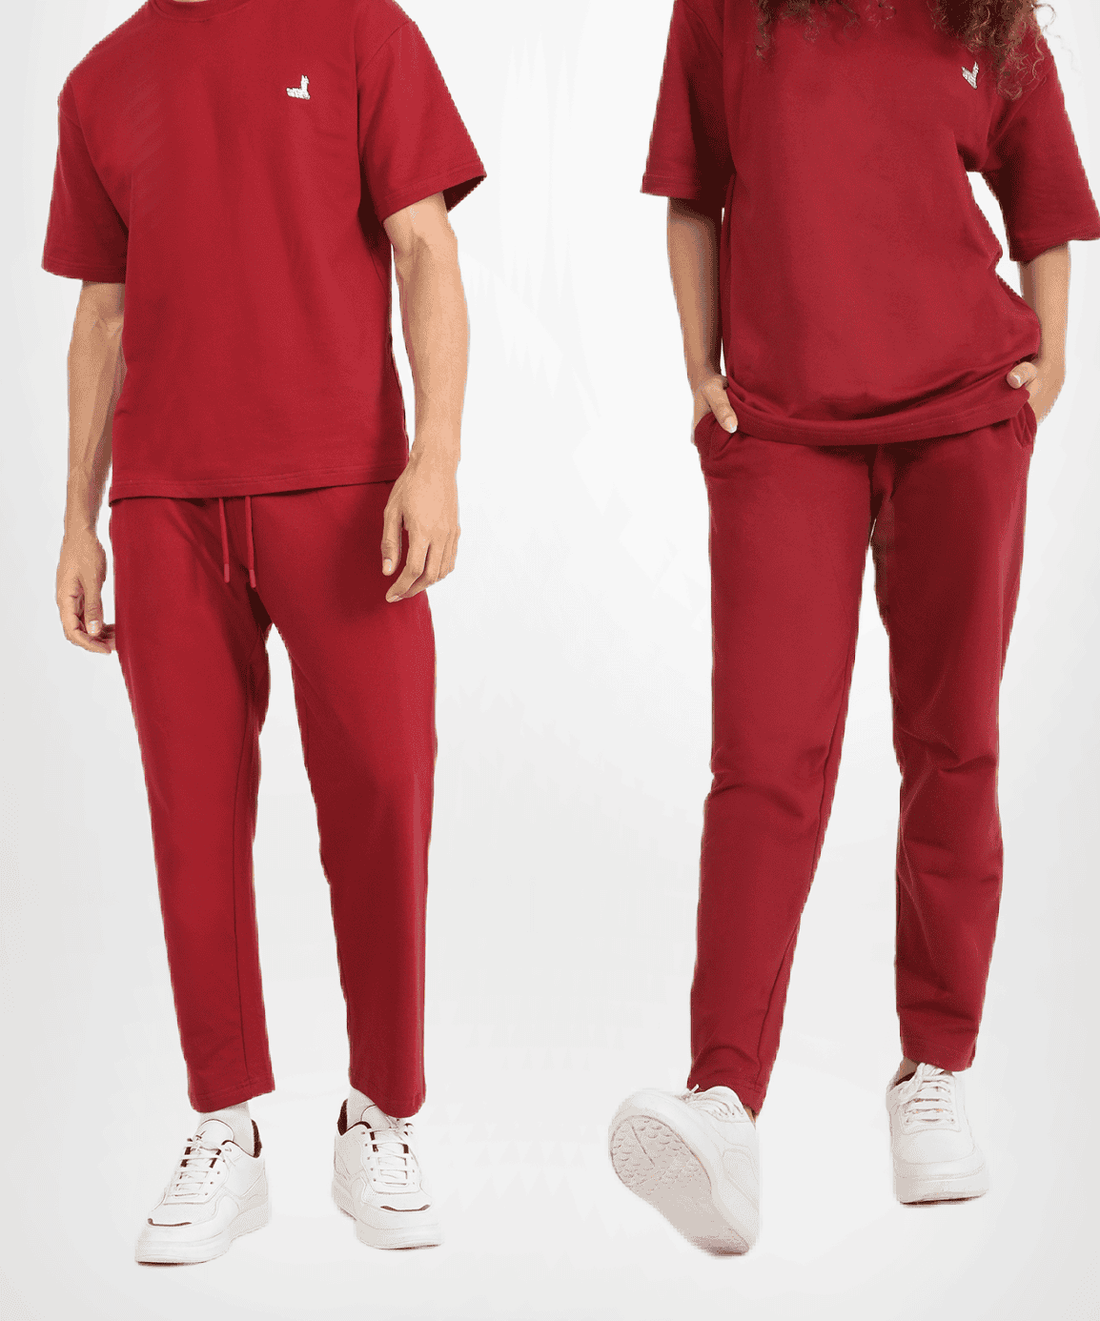 Red Hot Unisex Pants